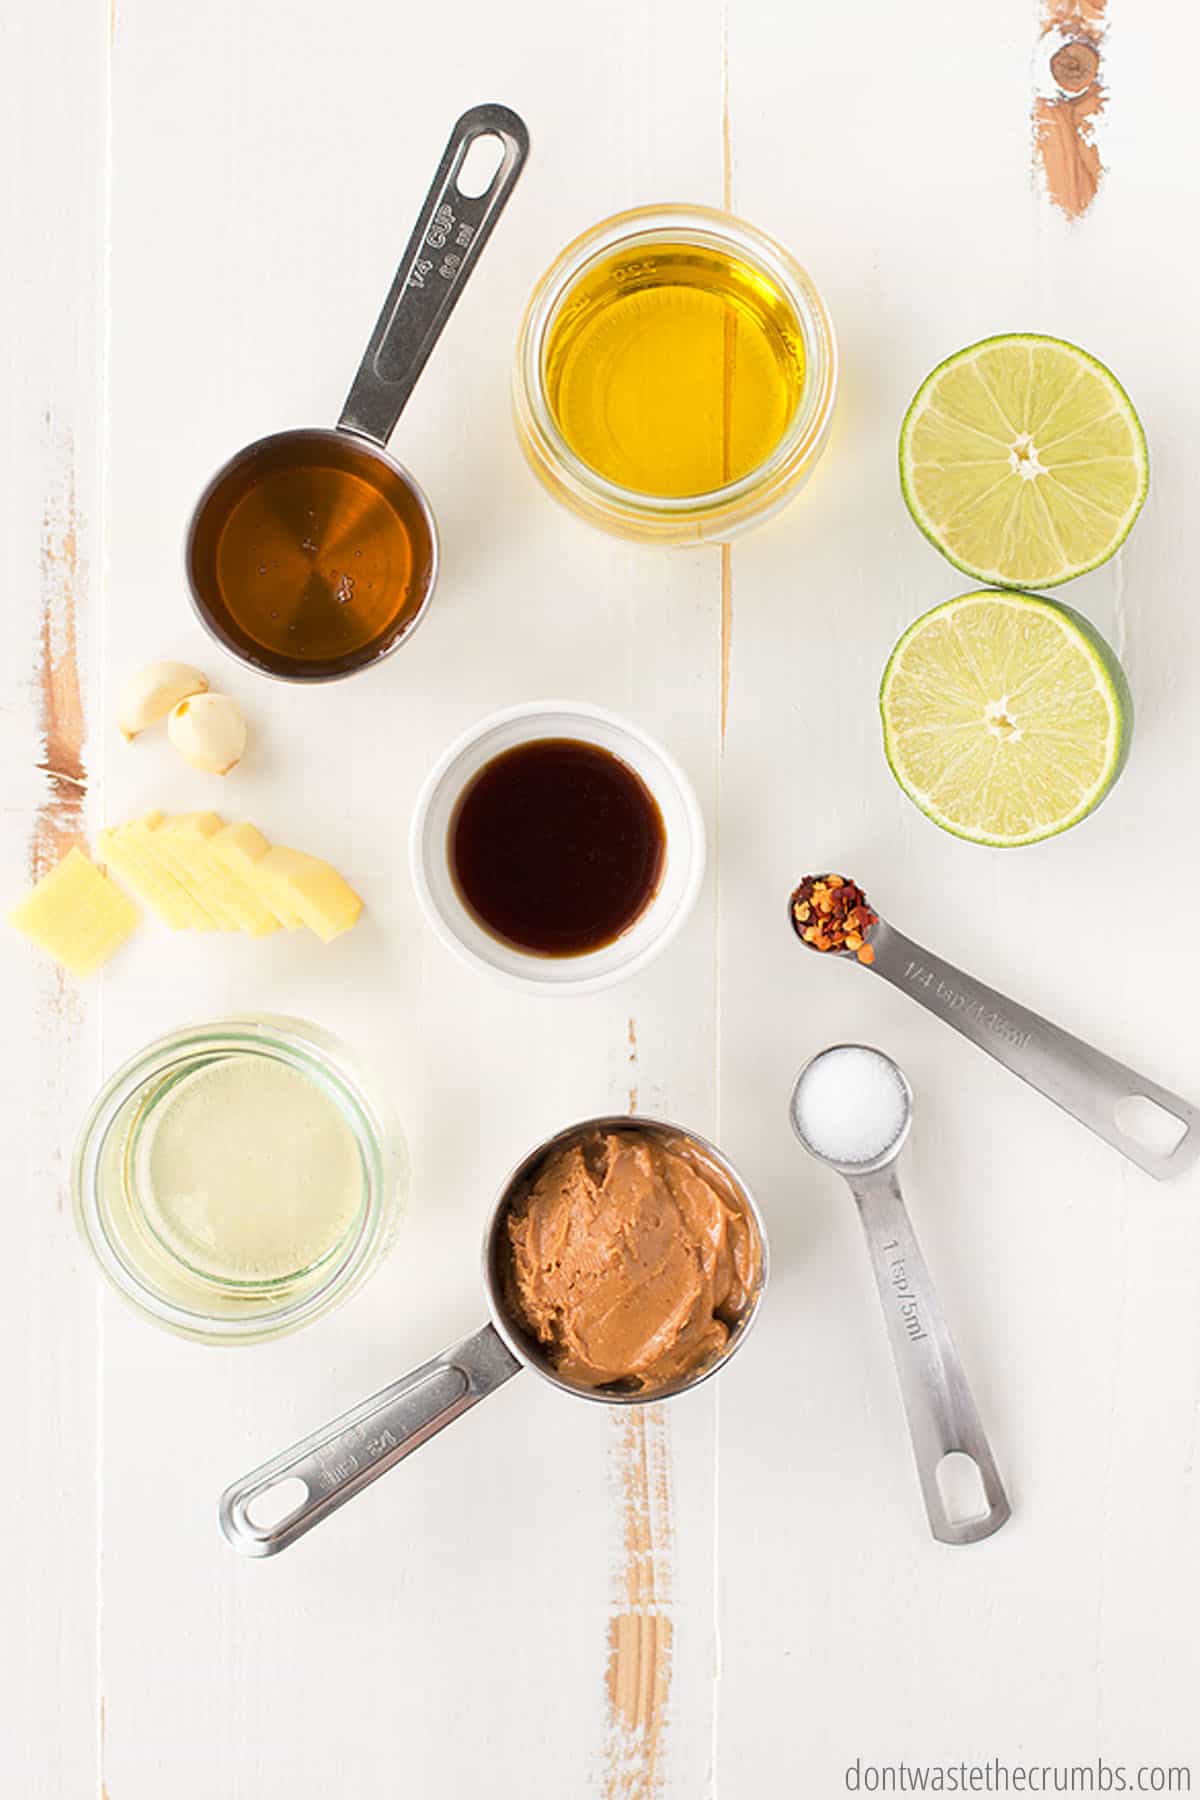 Shown are all the measured ingredients needed for Thai peanut sauce: halved limes, honey, rice vinegar, soy sauce, garlic, sliced ginger, red pepper, salt, peanut butter, sugar, and maple syrup.